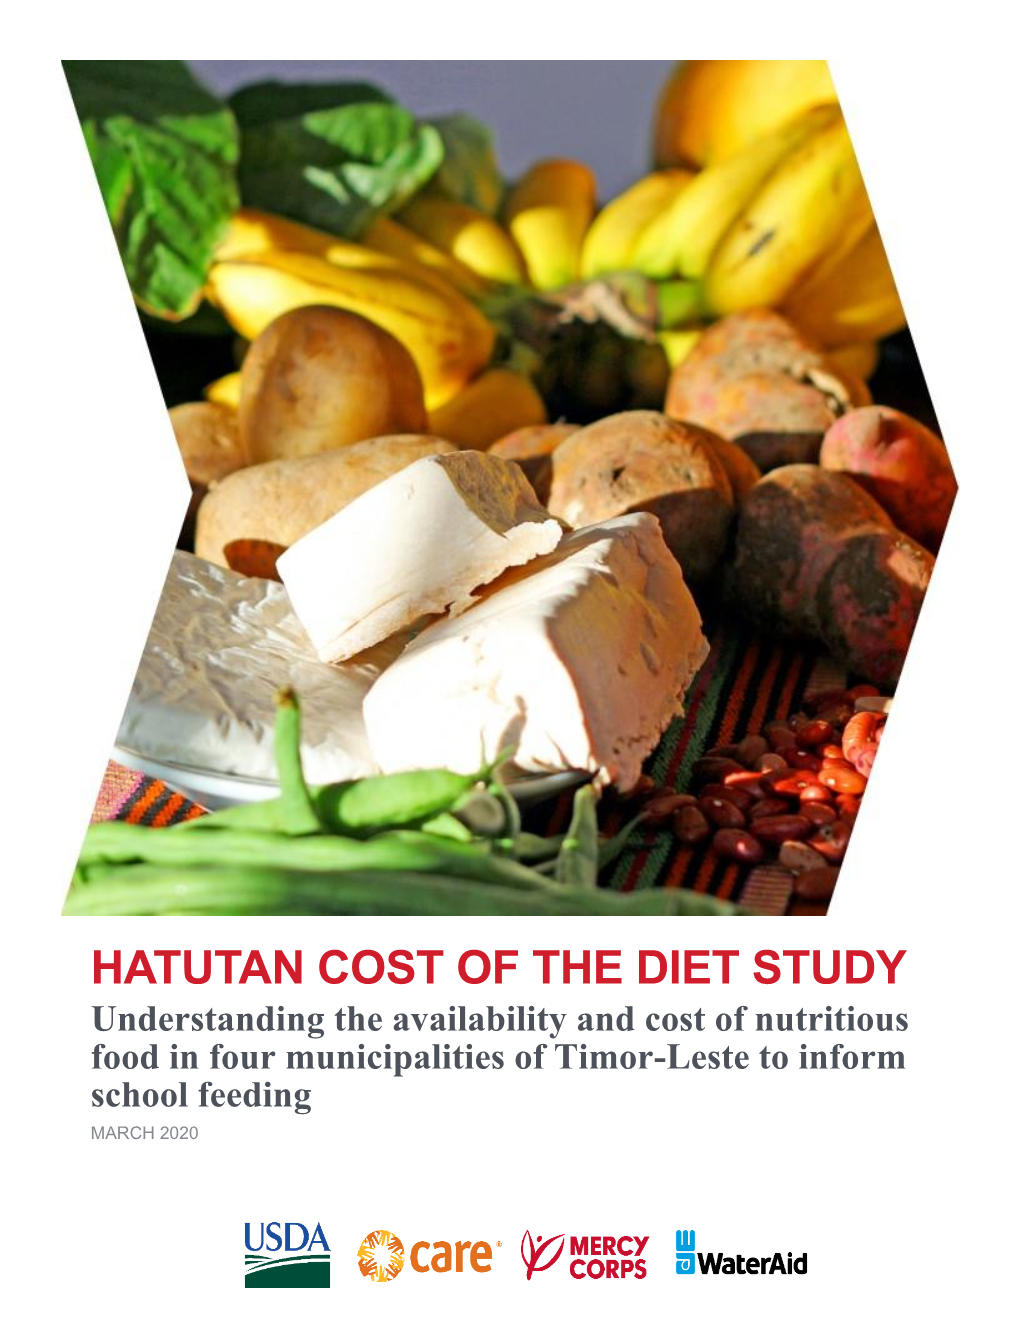 HATUTAN COST of the DIET STUDY Understanding the Availability and Cost of Nutritious Food in Four Municipalities of Timor-Leste to Inform School Feeding MARCH 2020